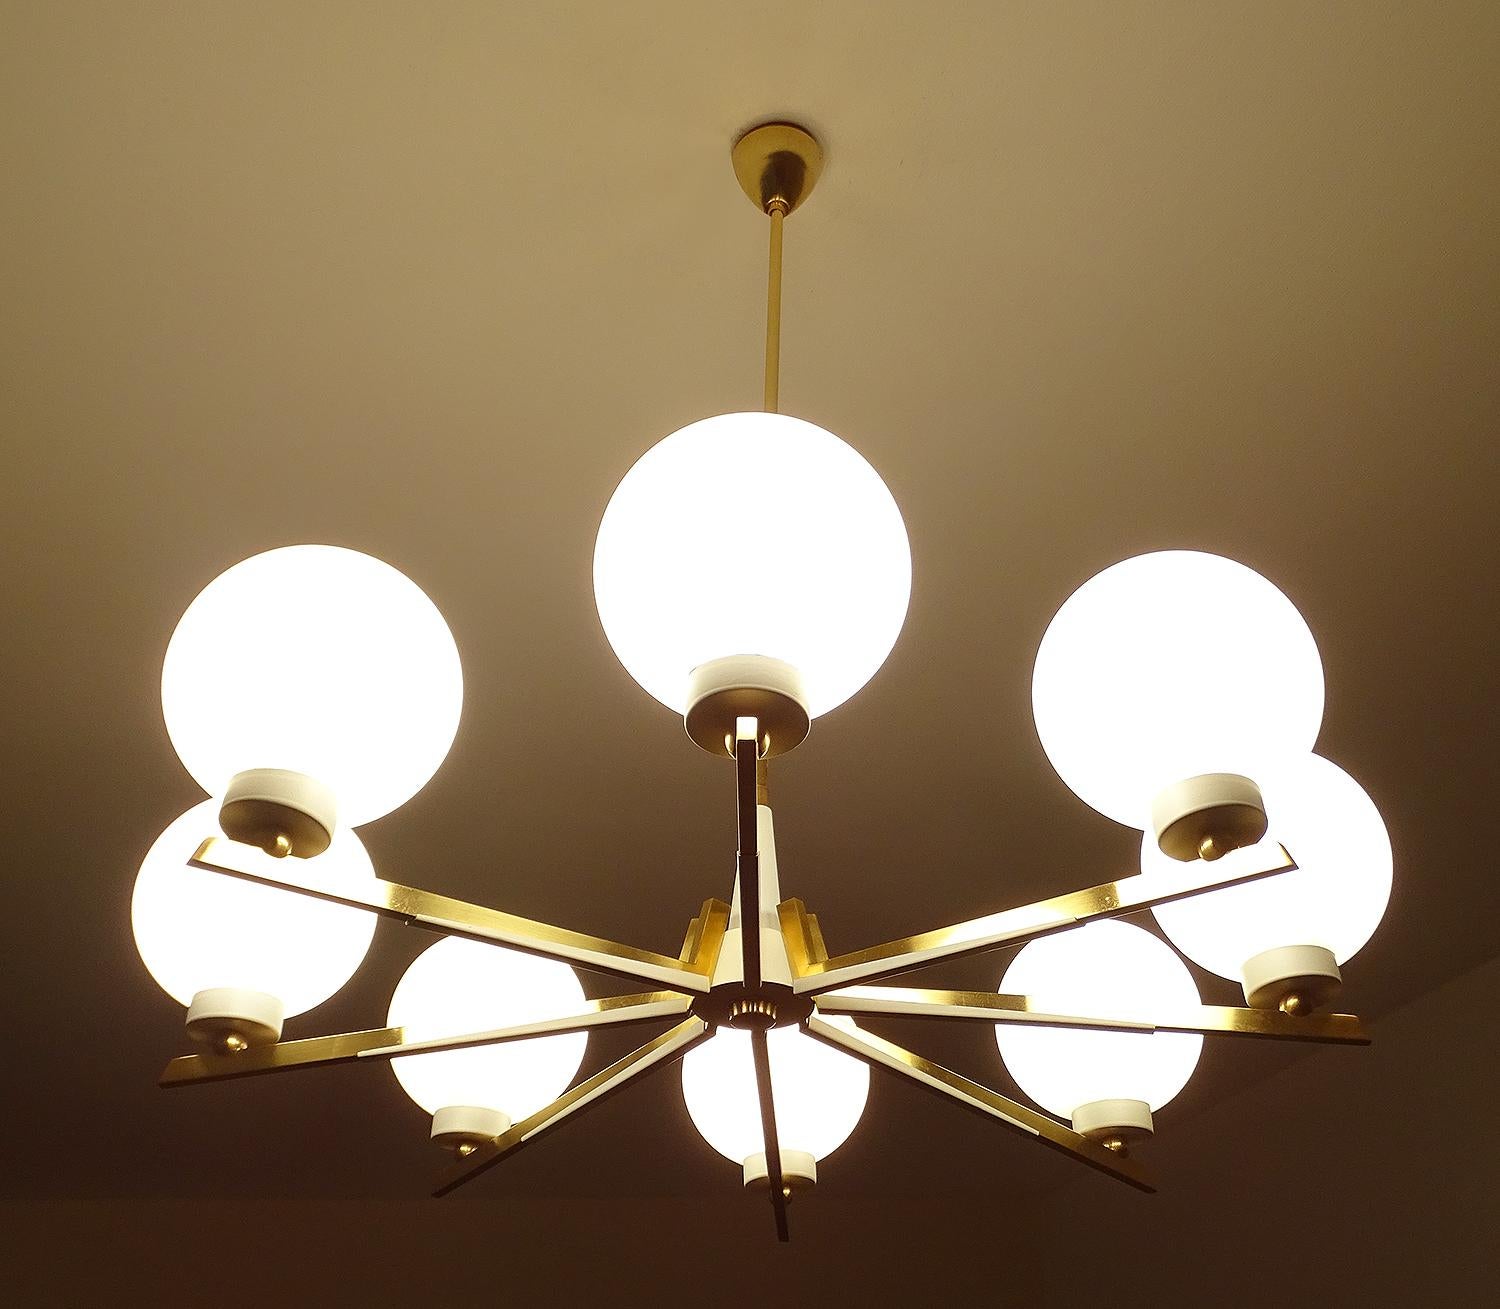 Large Original 1950s chandelier in the manner of Stilnovo,  white enameled arms with brass trim, opaline glass diffusers.
Dimensions
Height 30.71 in. x diameter 26.78 in.
Height 78 cm x diameter 68 cm
Eight candelabra size bulbs, 40 watts each.